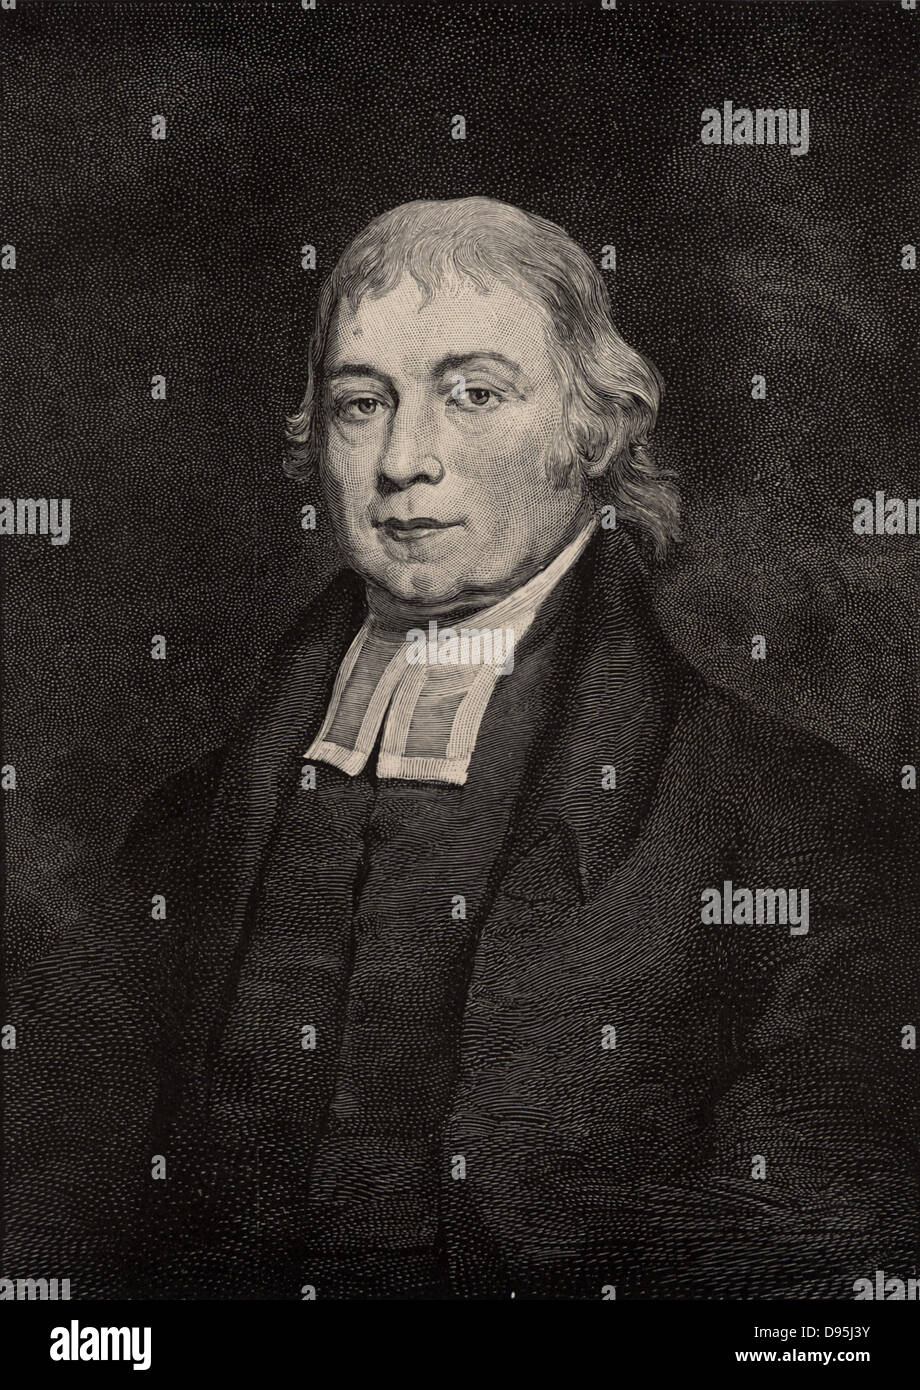 Gotthilf Henry Ernest Muhlenberg (1753-1815), American Lutheran minister and botanist.  First President of Franklin College, Pennsylvania (1787).  A member of the German-American family who led the Pennsylvania Lutheran community.  Engraving, 1896. Stock Photo